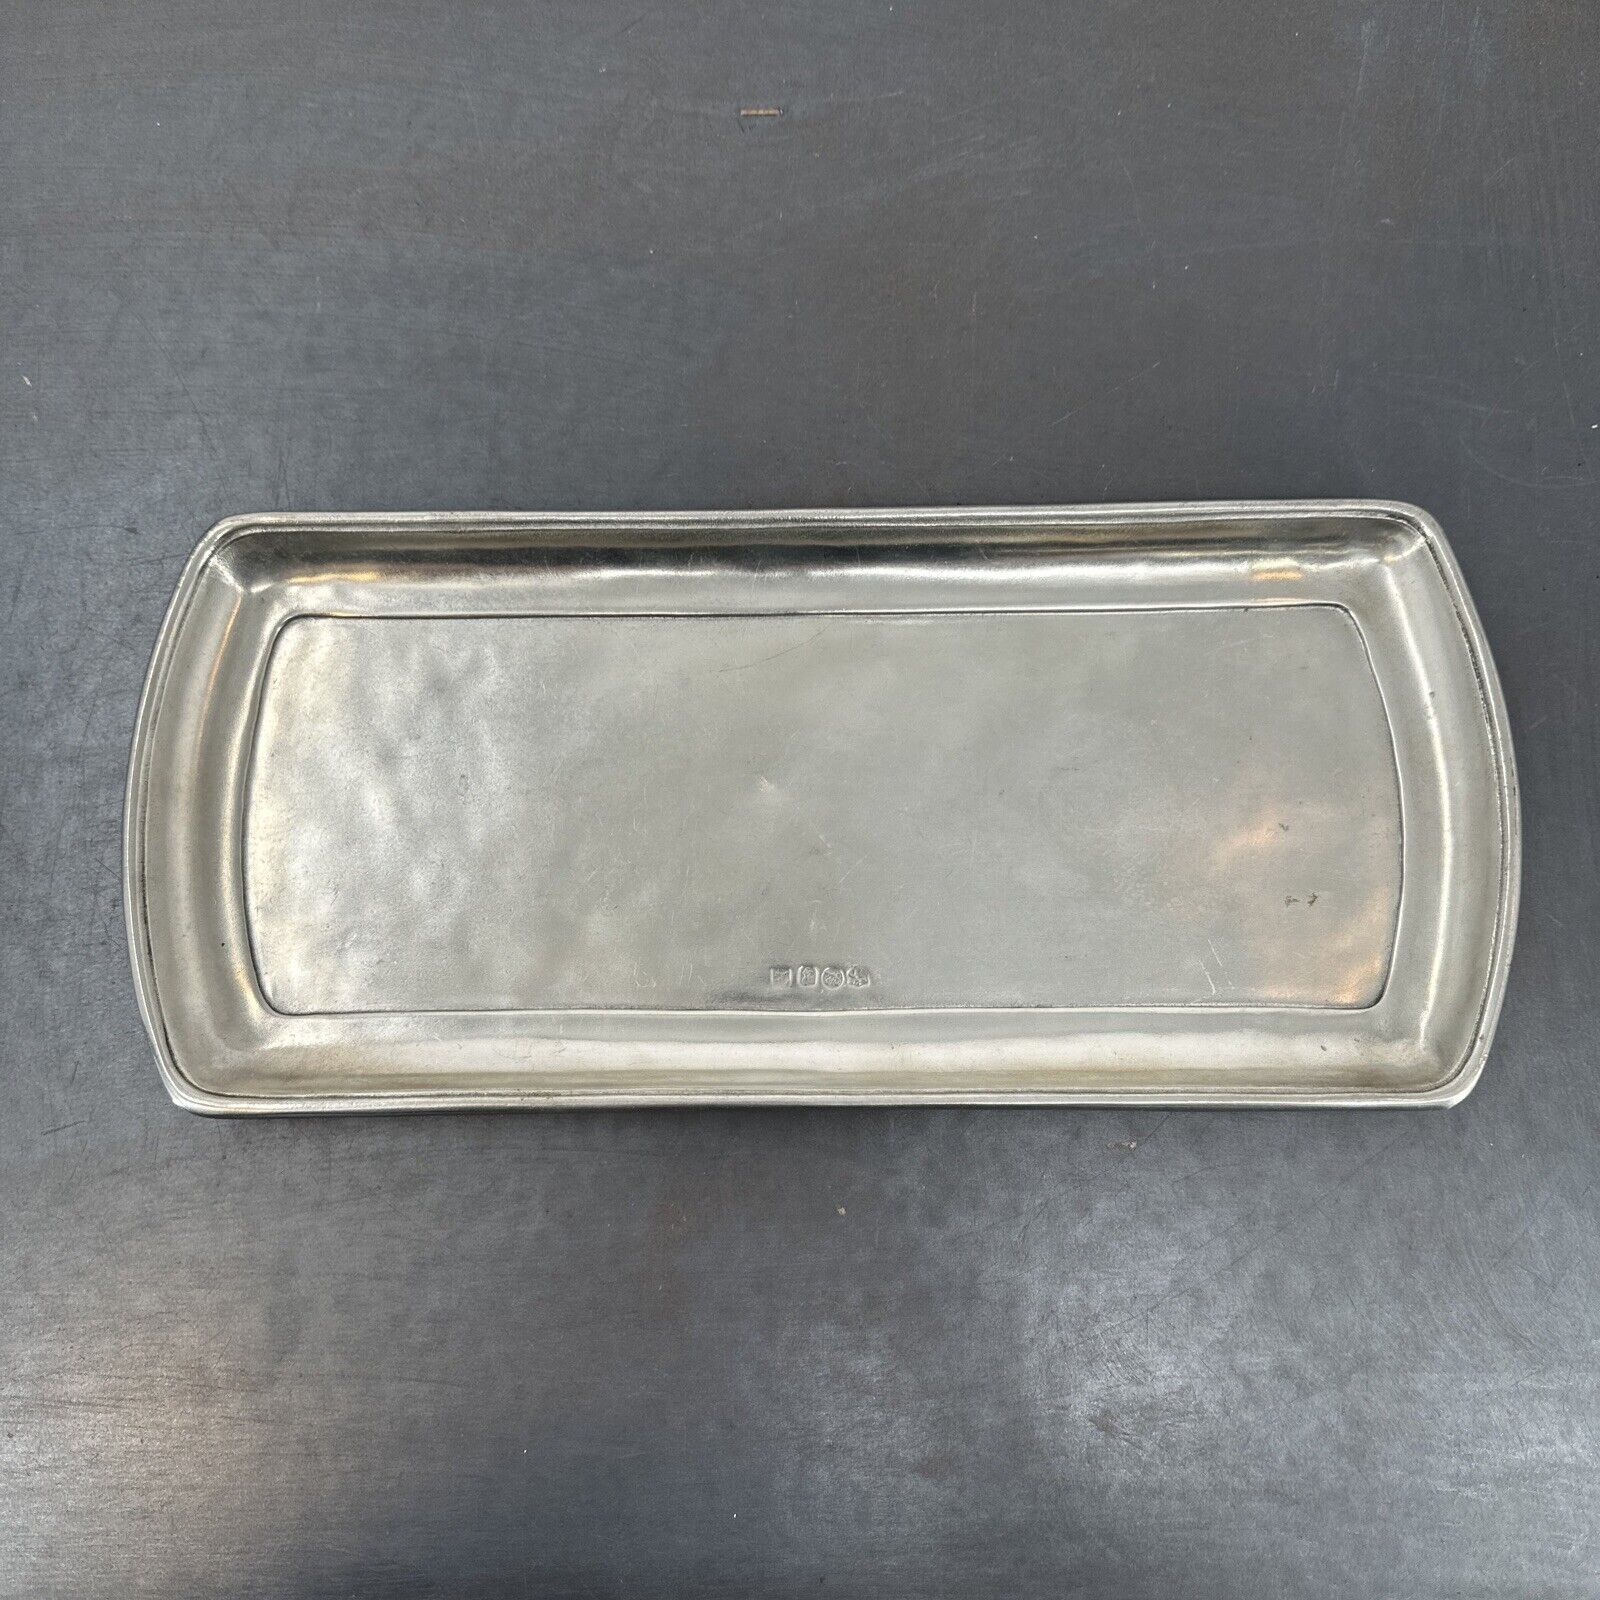 Cosi Tabellini 13” Rectangle Pewter Tray Made In Italy Stamped 92 Plum Cake